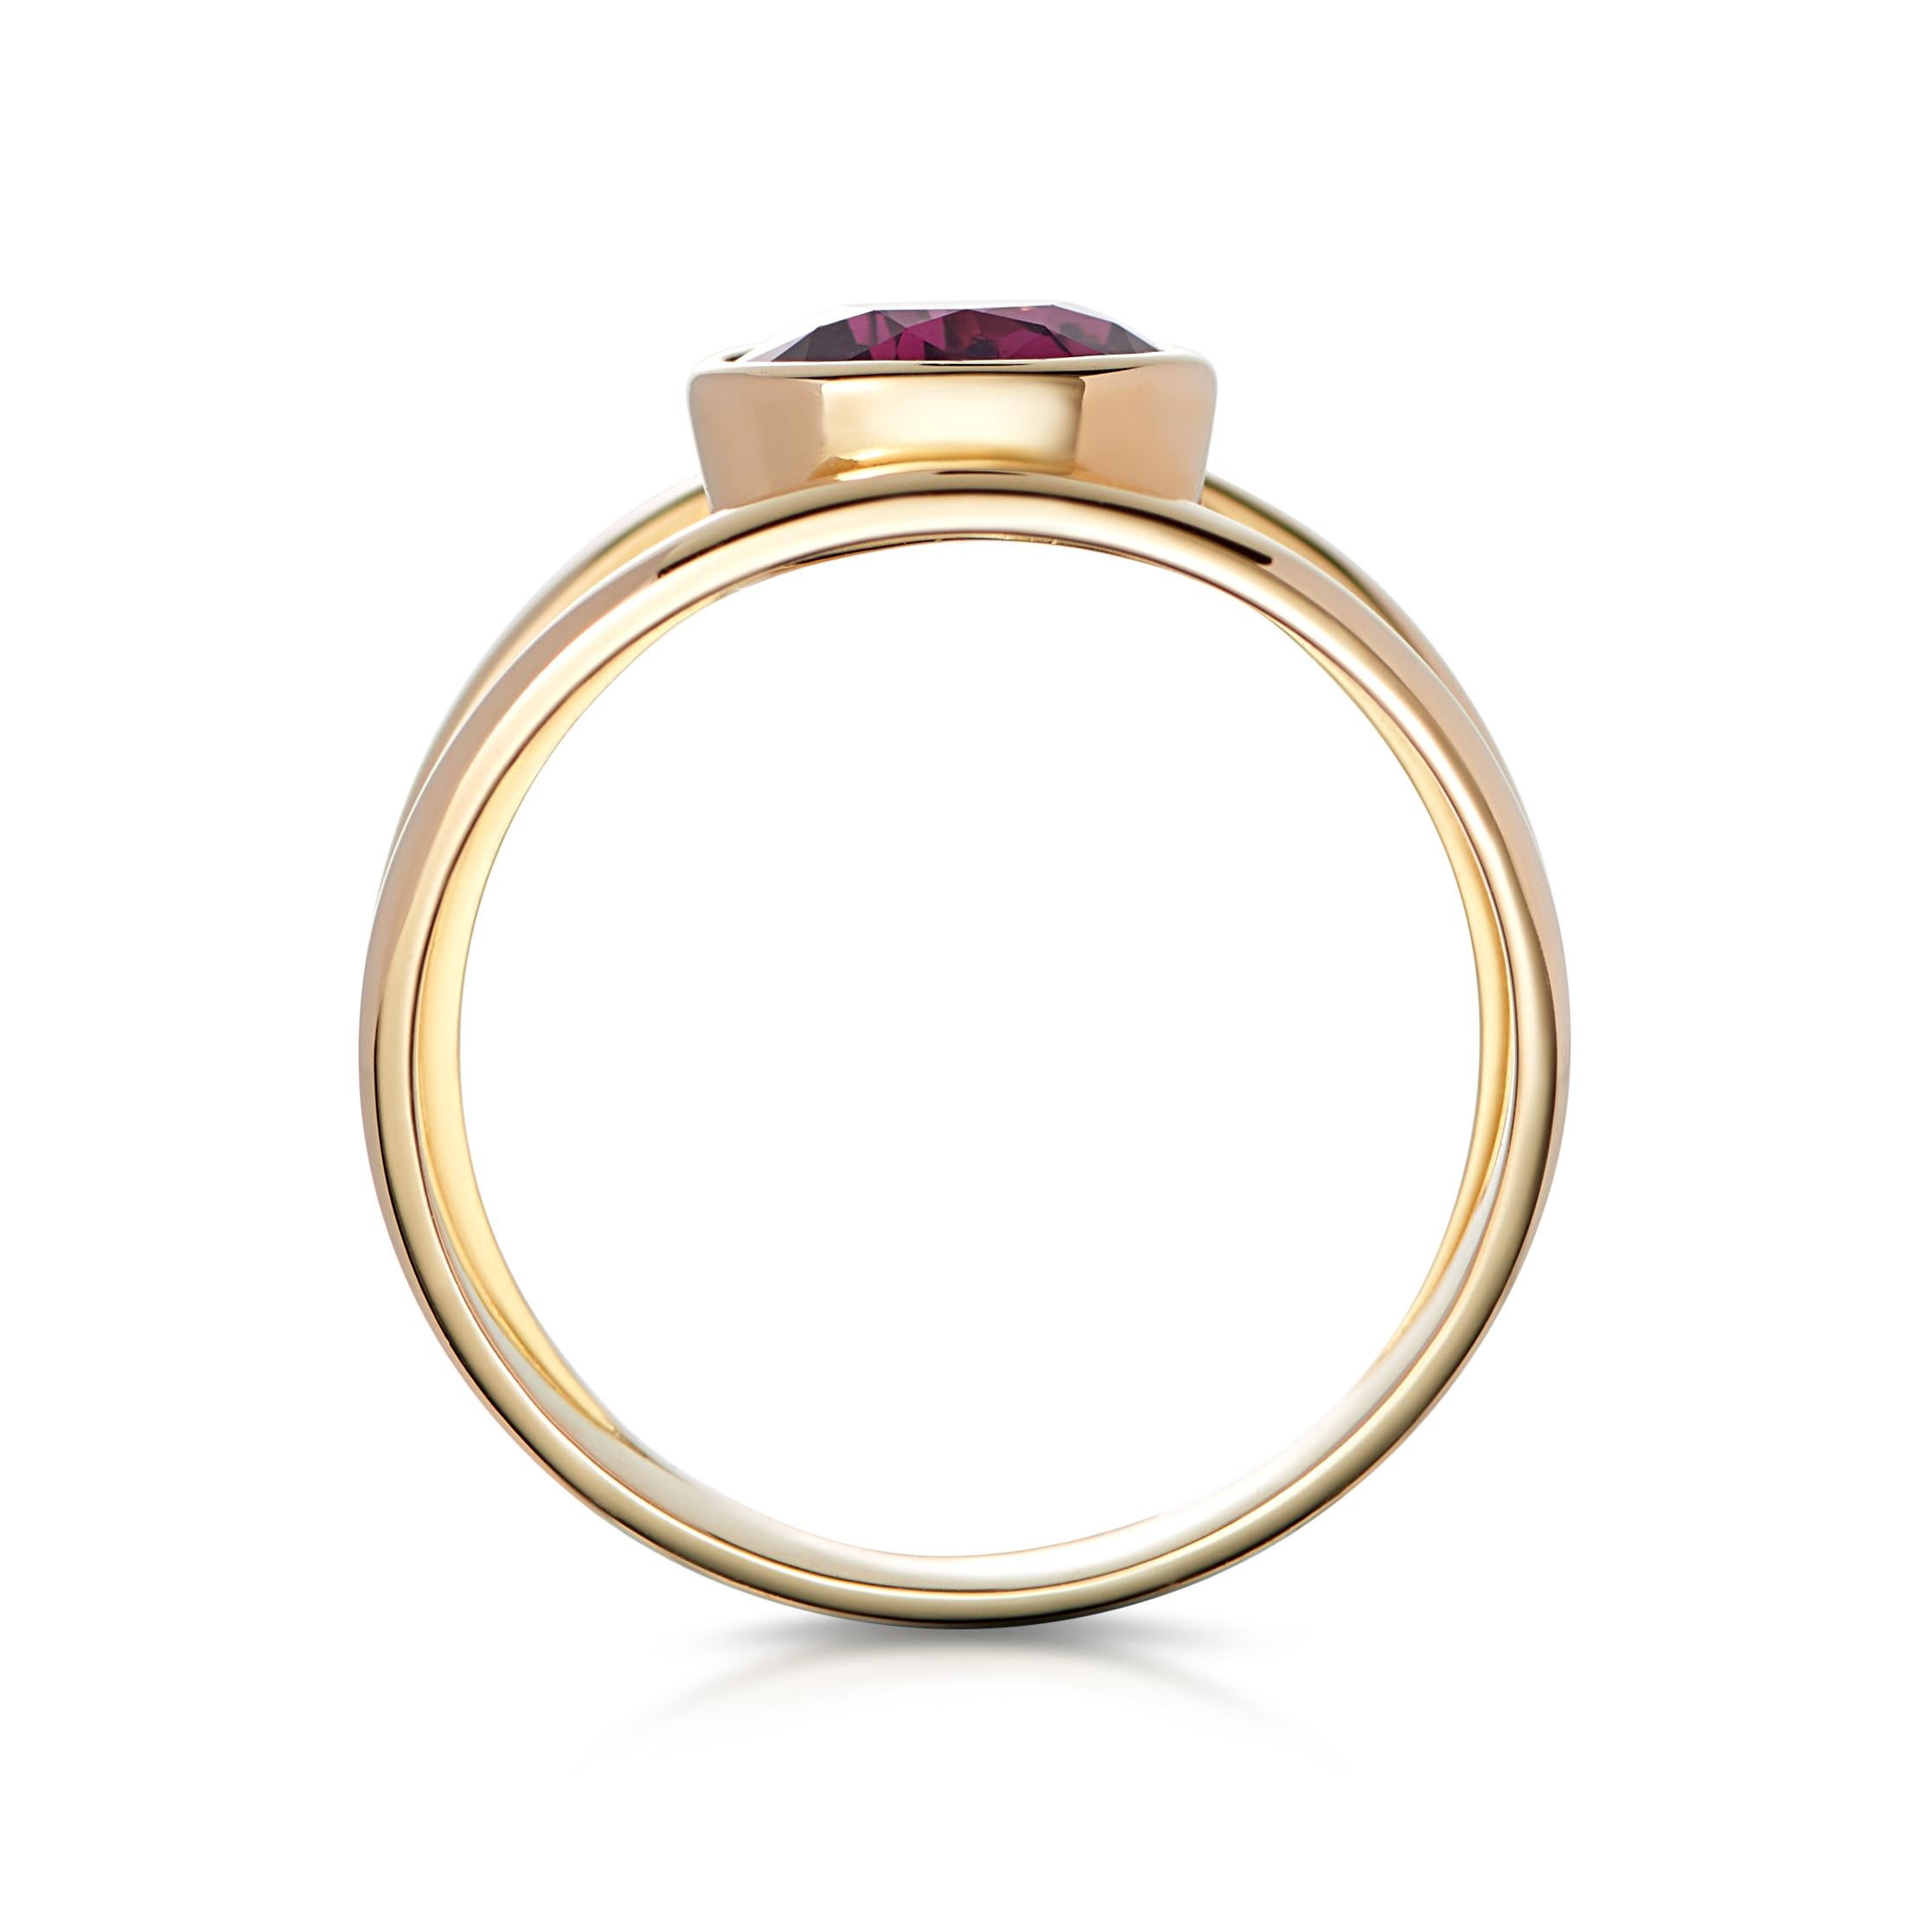 Magical Spinels. Often mistaken for Rubies, Spinels have been favoured for centuries by Mughal Emperors, Kings and Queens, even the British Imperial State Crown has one. 

This modern and elegant ring is timeless. The Spinel has excellent lustre and